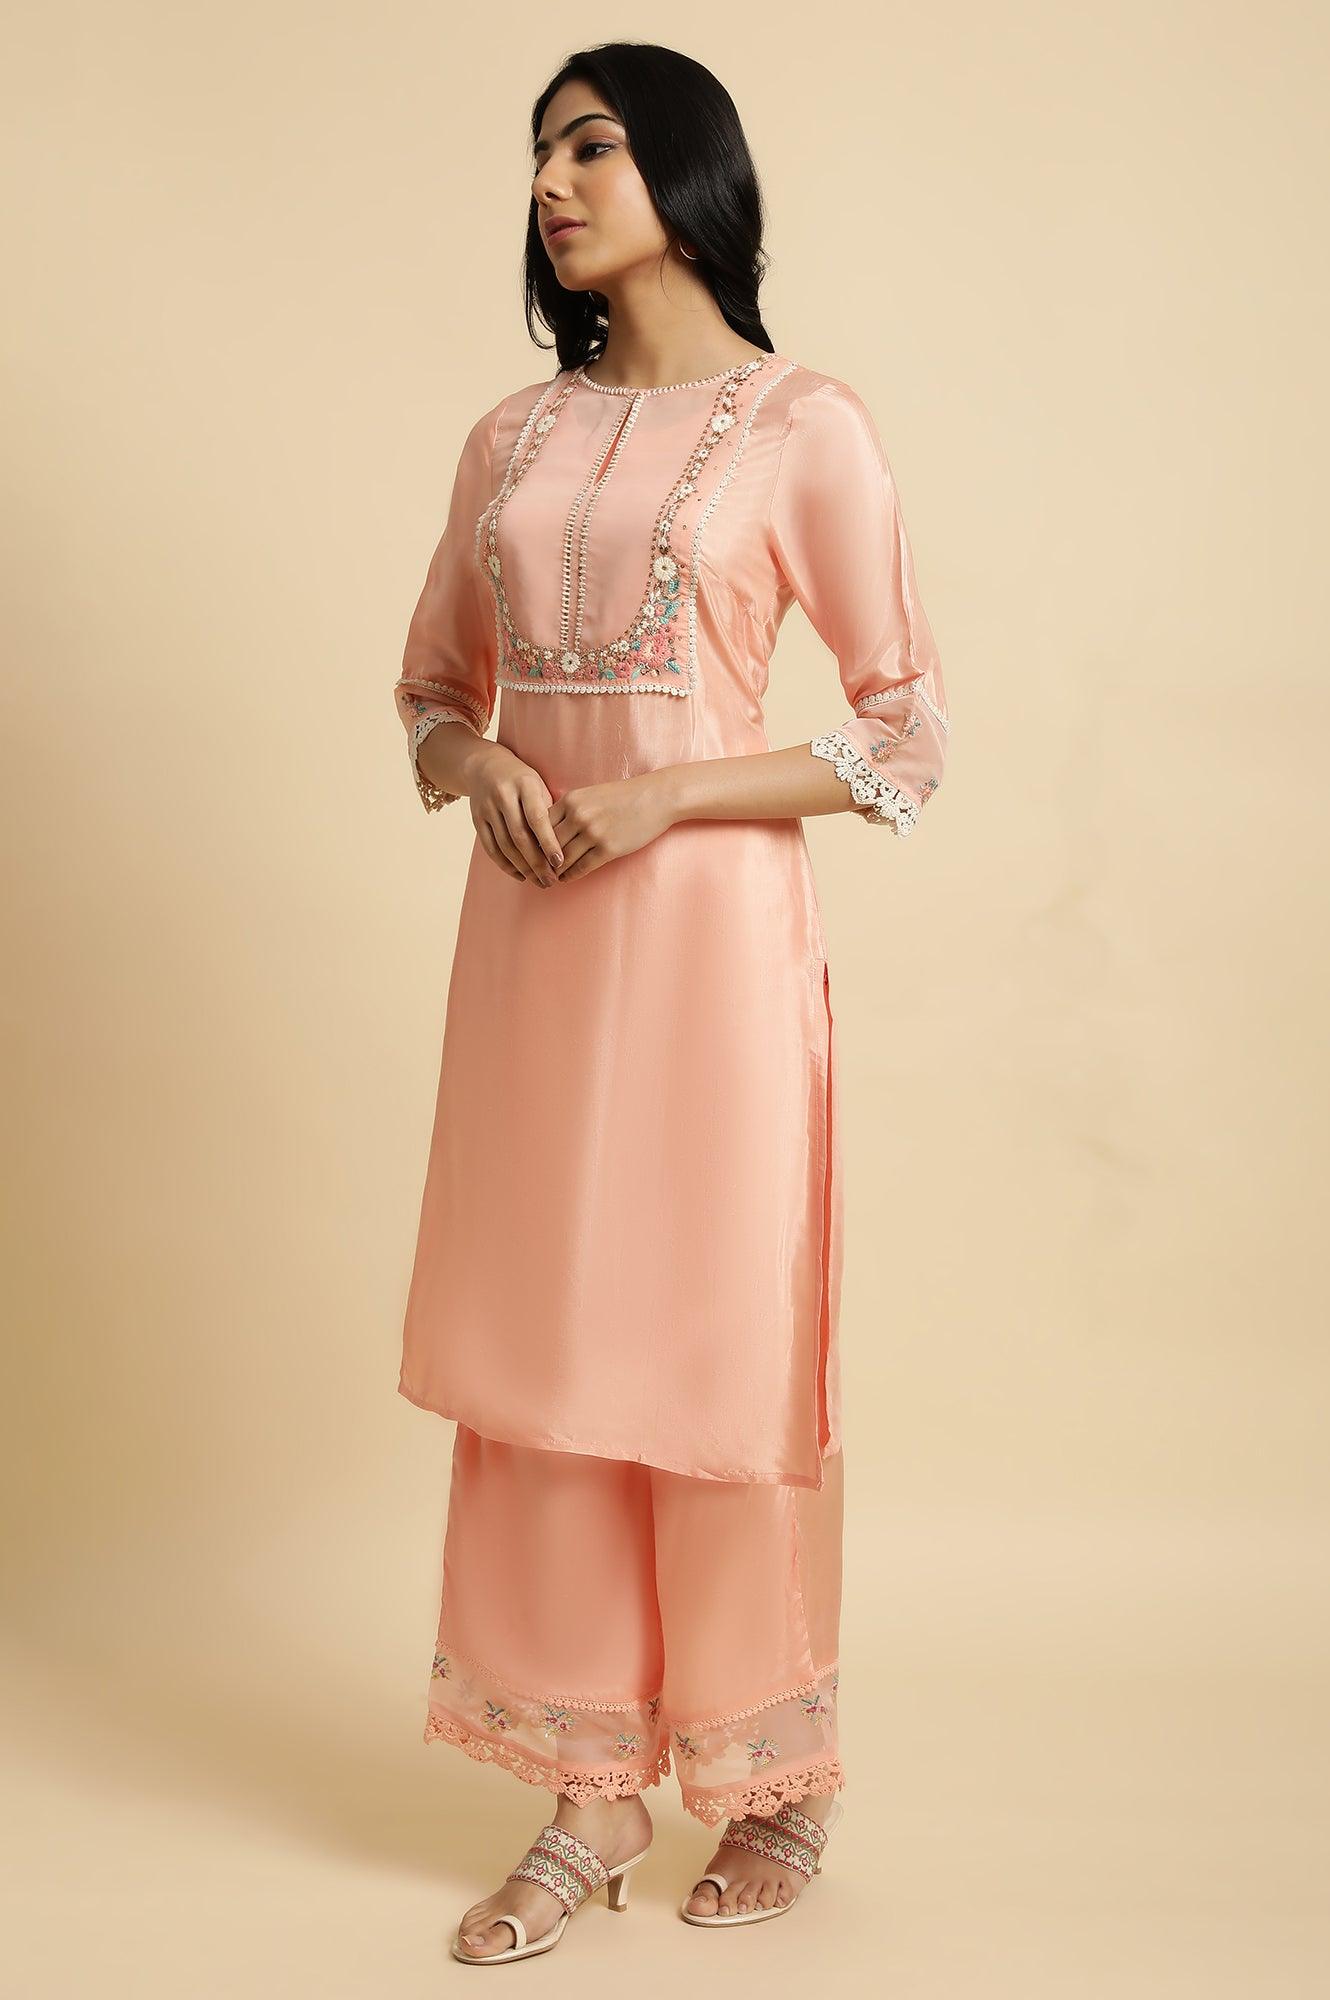 Pink Parallel Pants With Lace And Embroidery - wforwoman